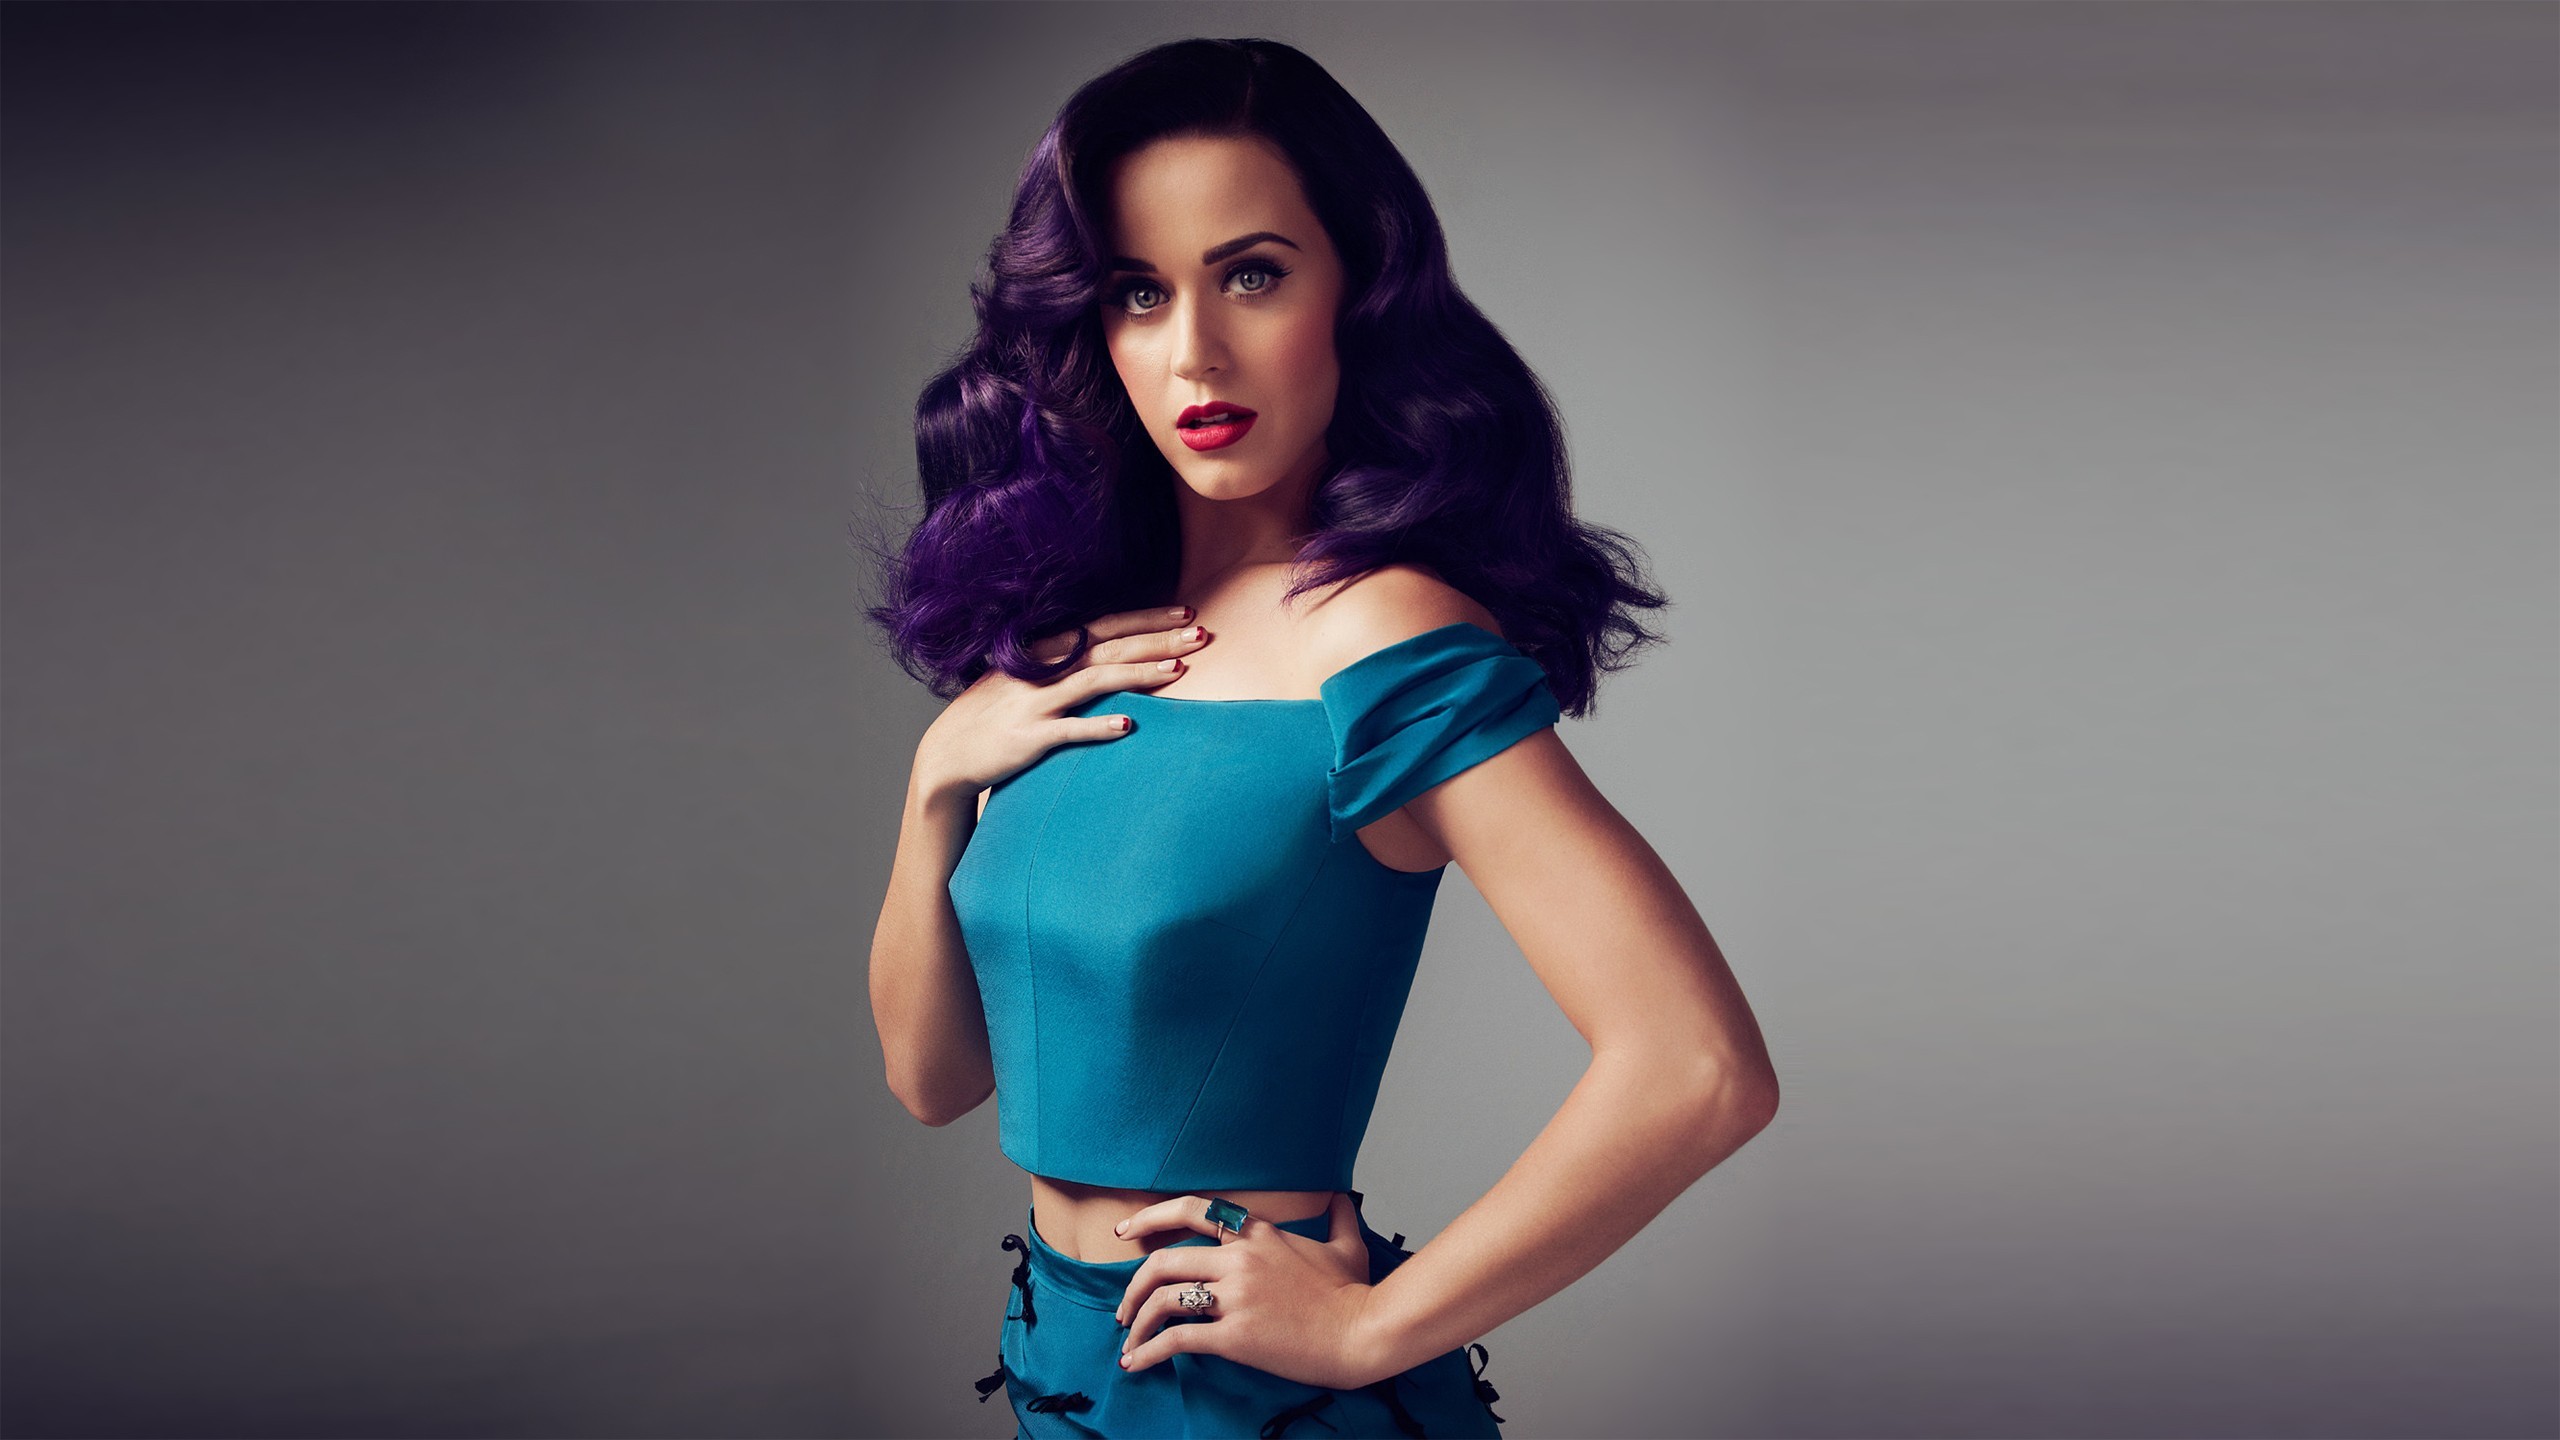 Wallpapers Of Katy Perry